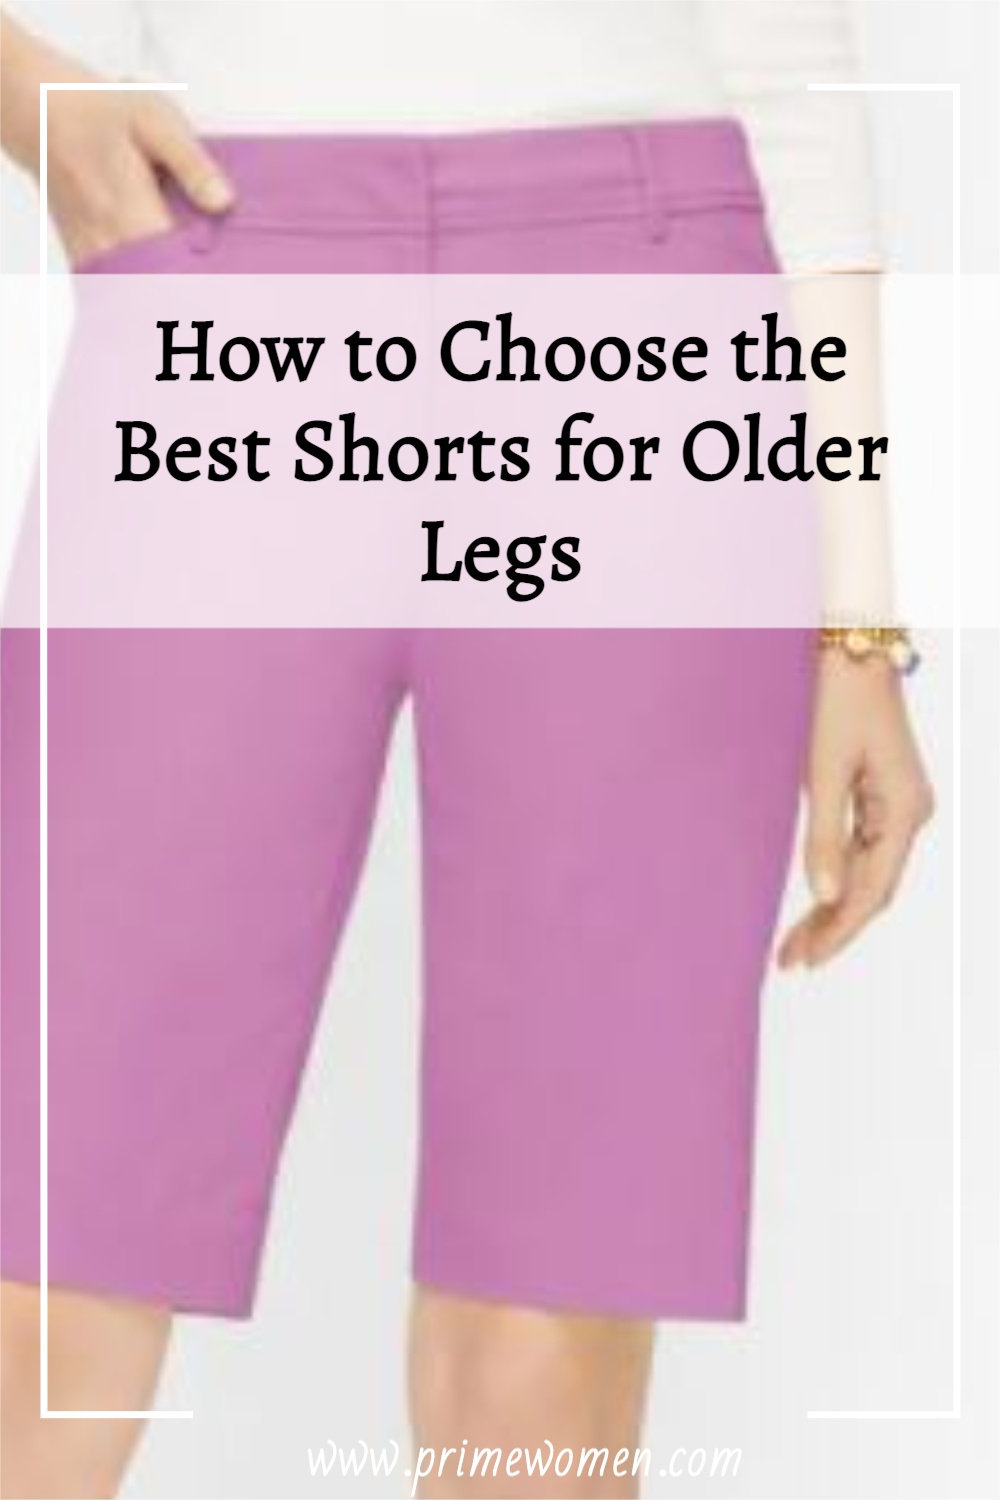 How-to-Choose-the-Best-Shorts-for-Older-Legs-